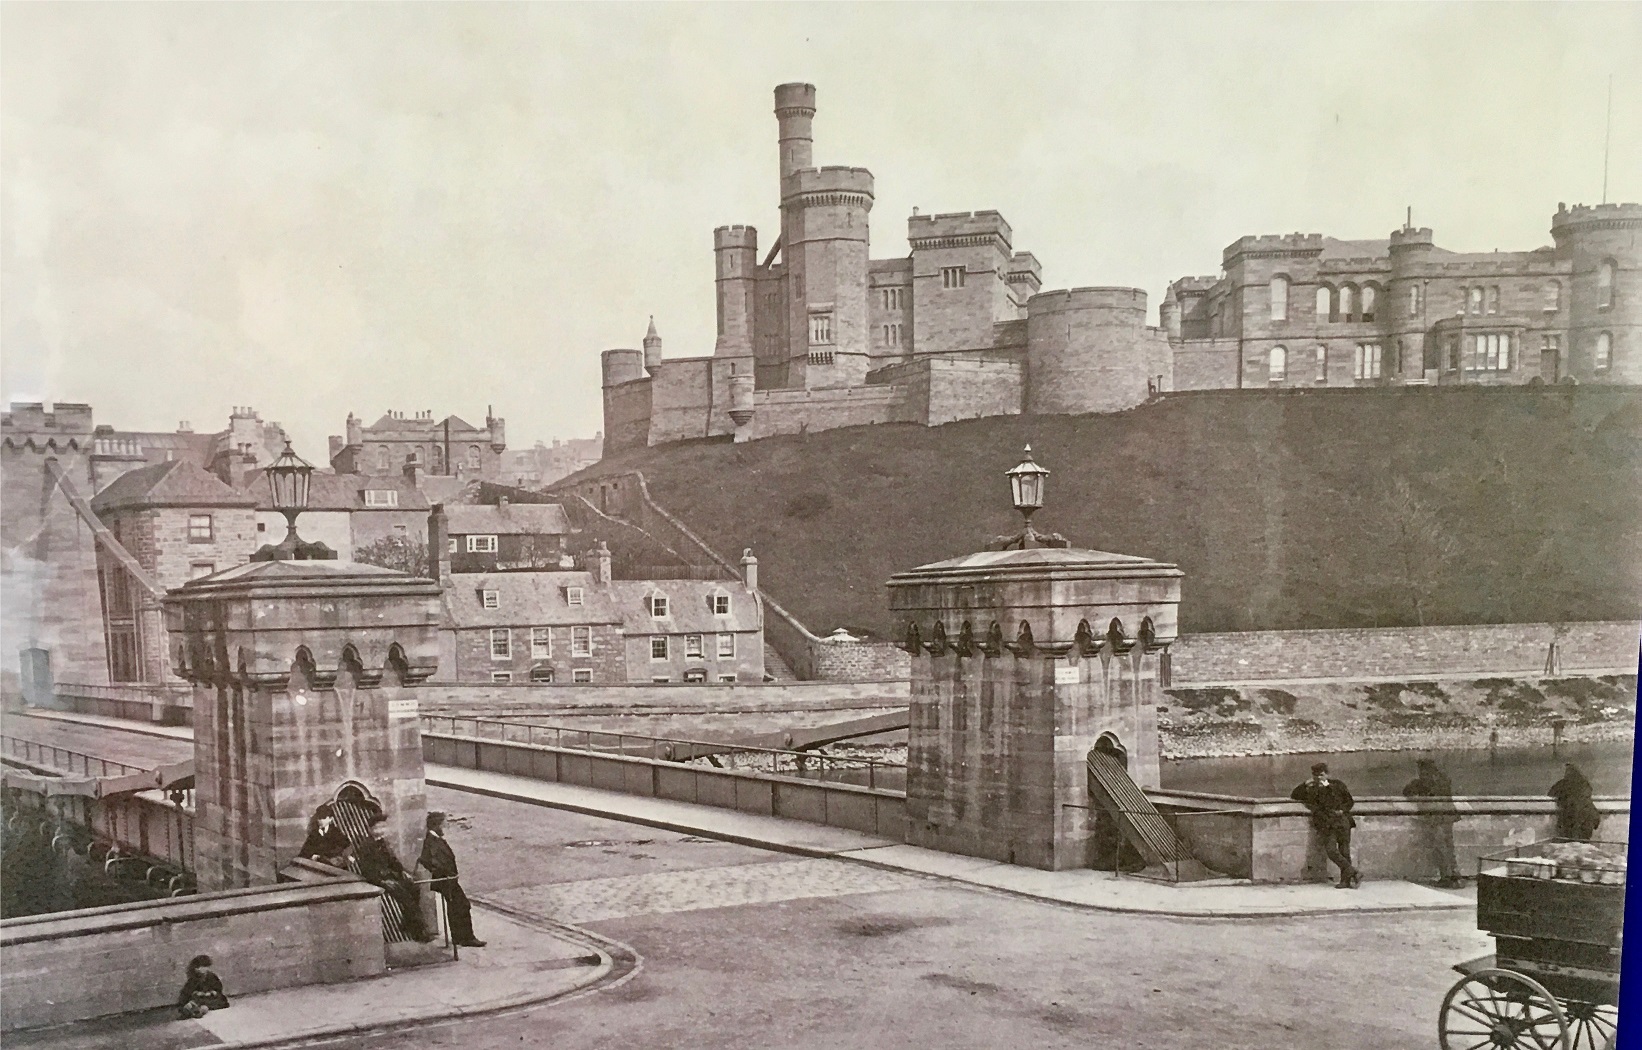 Inverness Castle in the 1920s